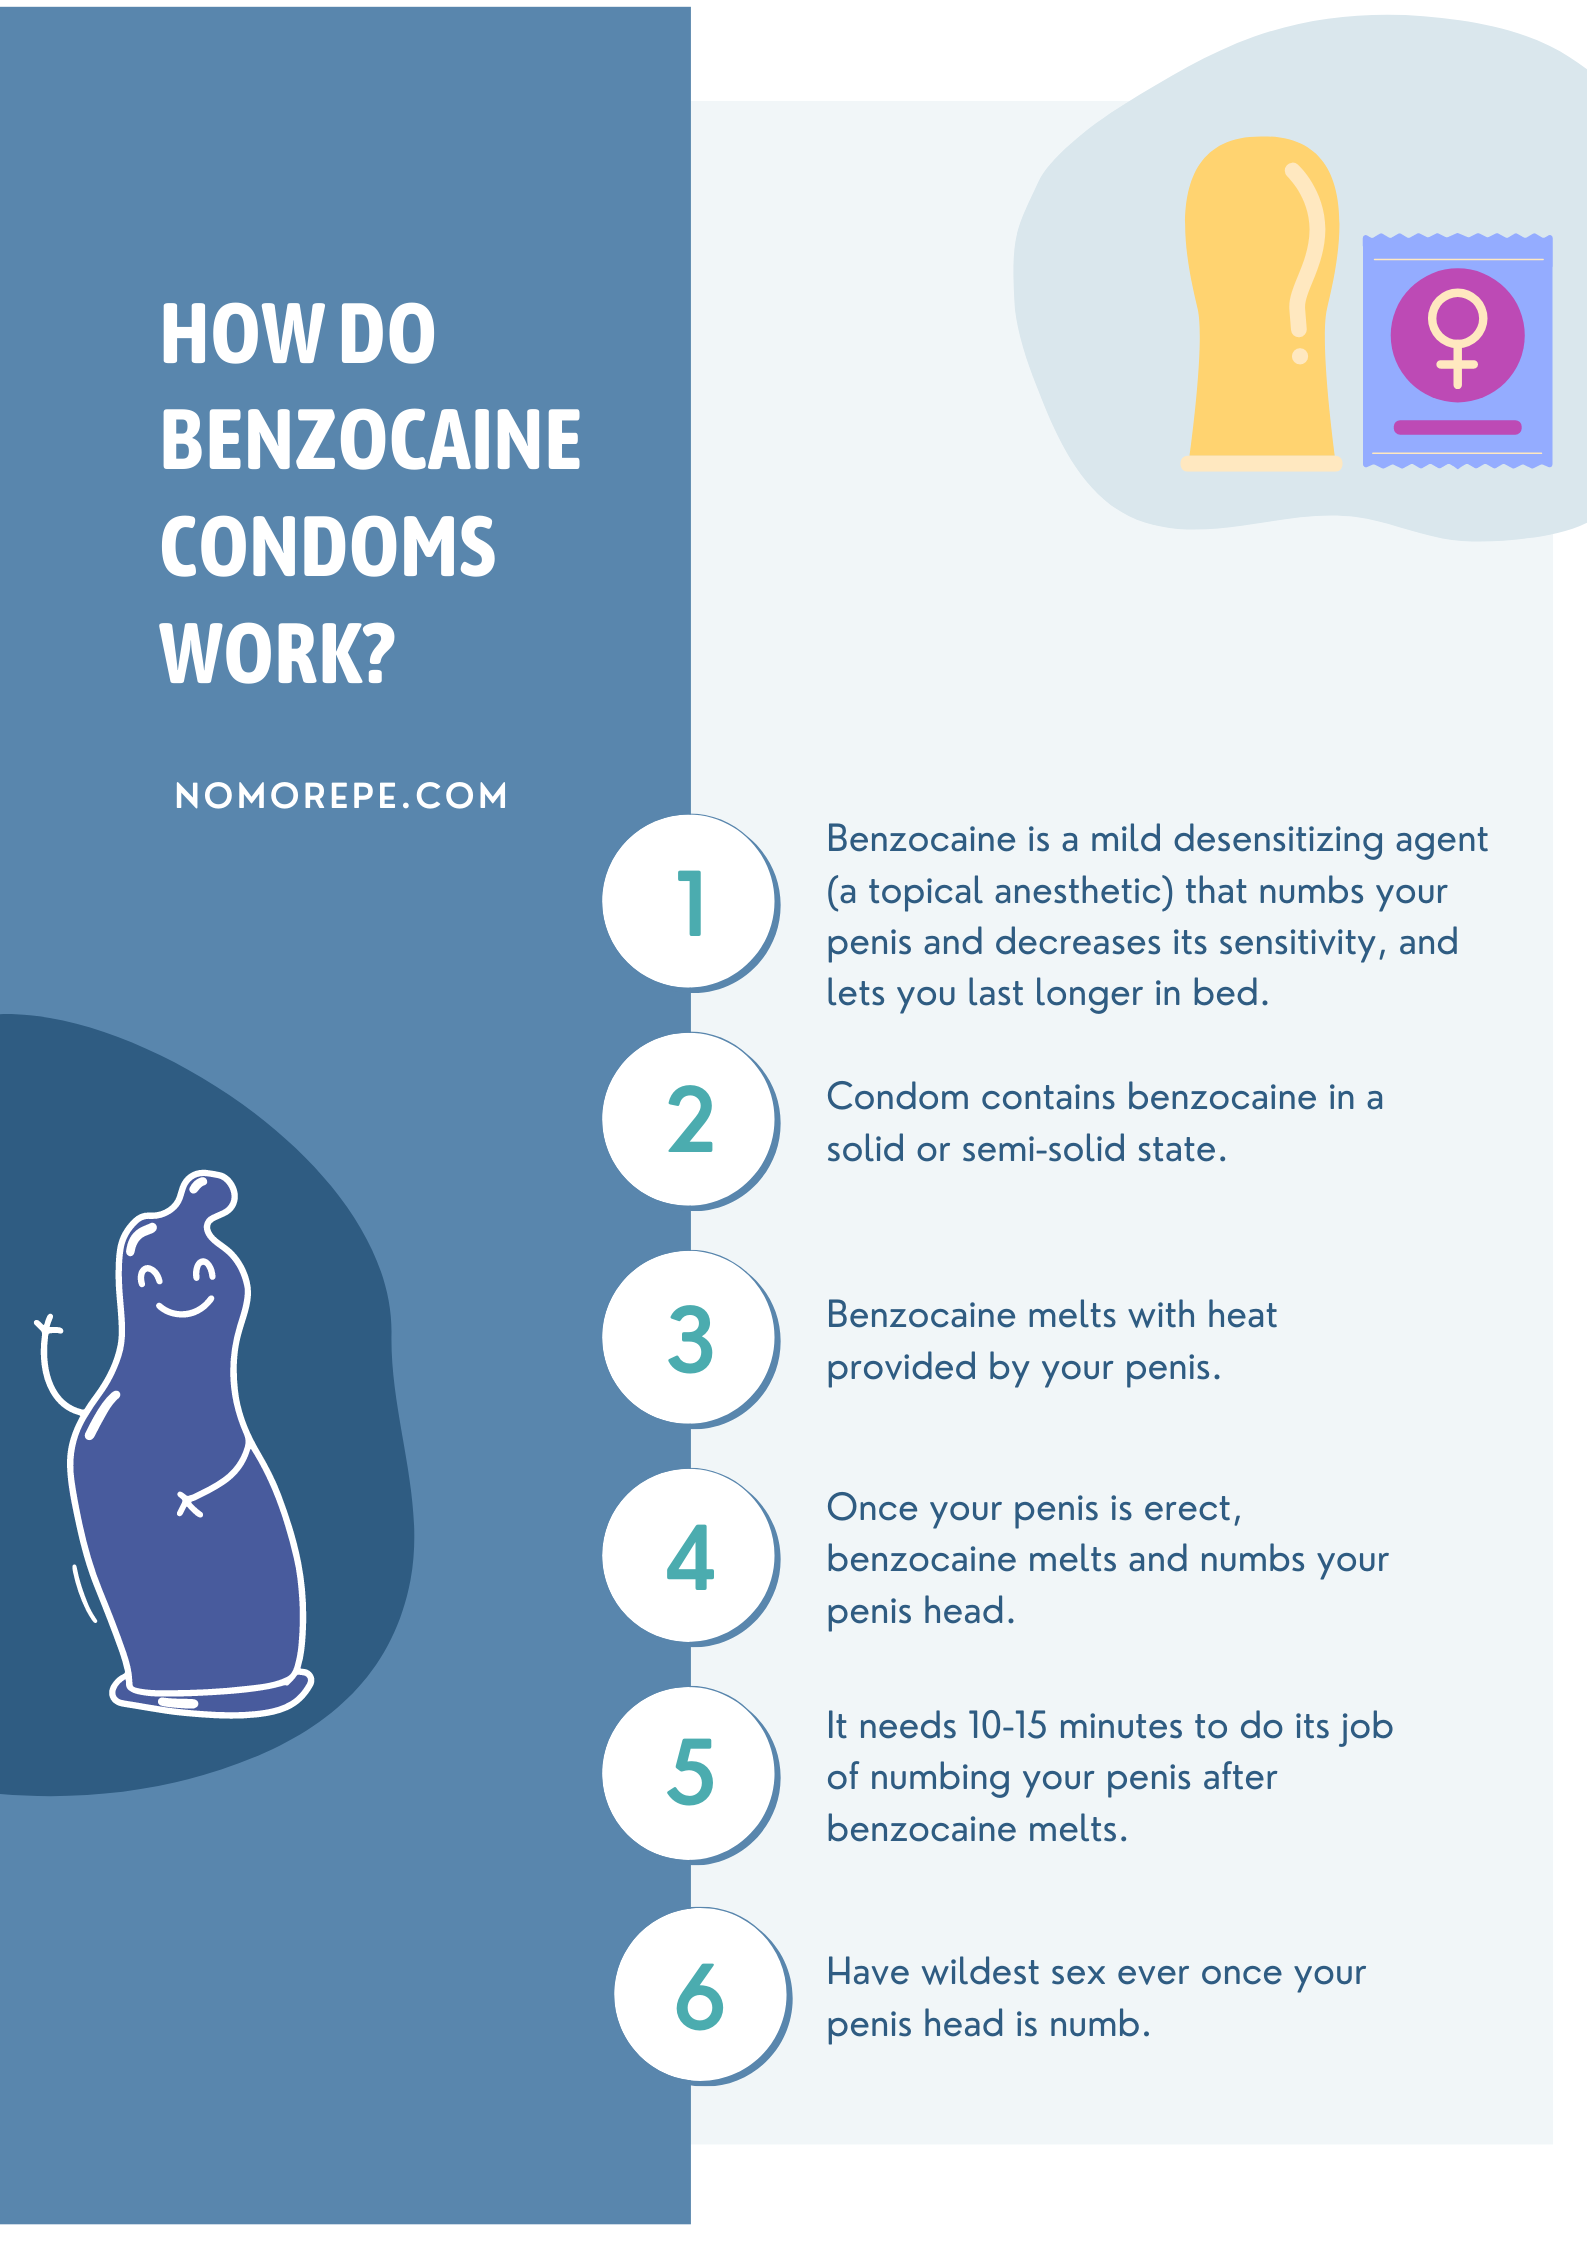 how do benzocaine condoms work in 6-steps 